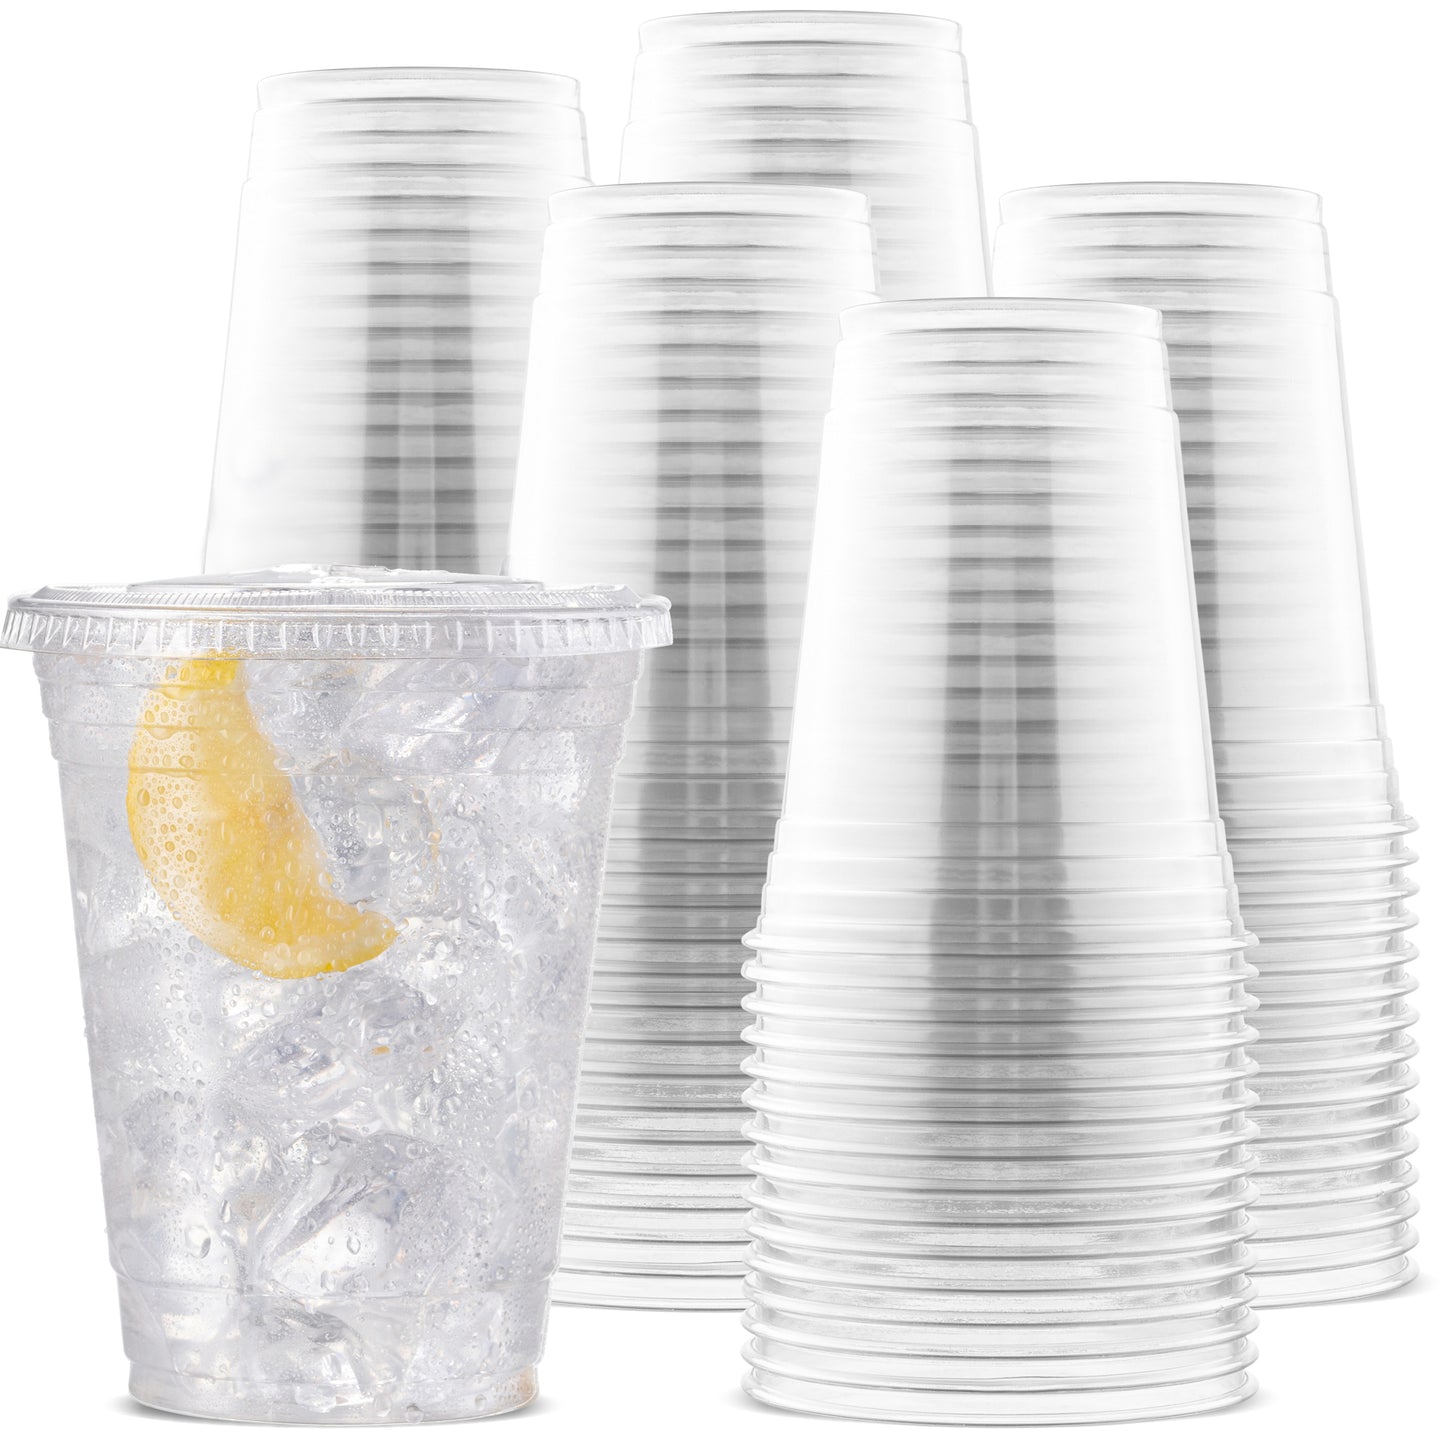 [100 Count 16 oz.] Plastic Cups with [Straw-Slot Flat Lids] - PET Plastic Cups 16 oz - 16oz Plastic Cups - Crystal Clear Cups Disposable Party Cups - Disposable Cups for Water, Beer, Booze, Smoothie - Large Cold Drink Clear Cups